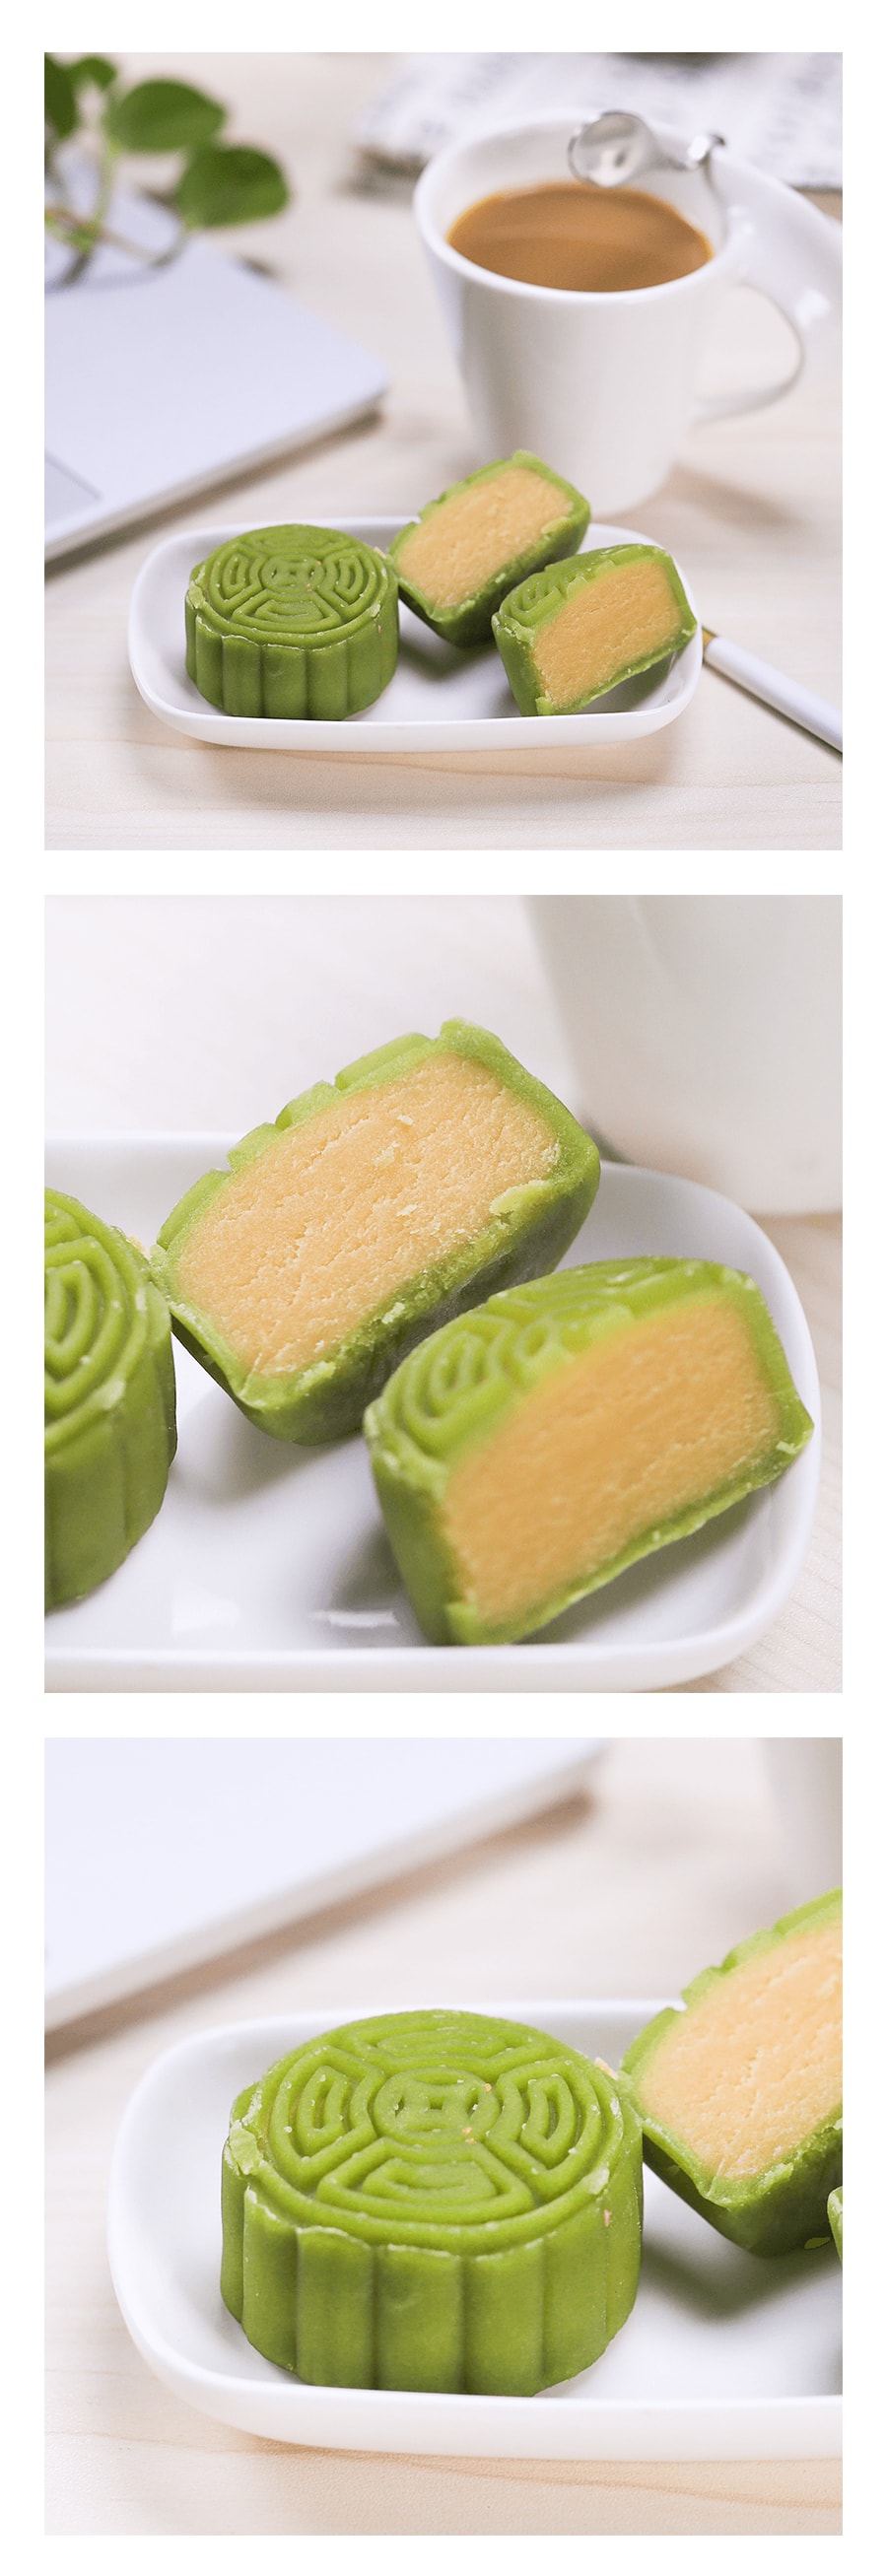 ONETANG Moon Cake Momoyama Style With Cream & Bean 100g 【Delivery Date: Mid August】